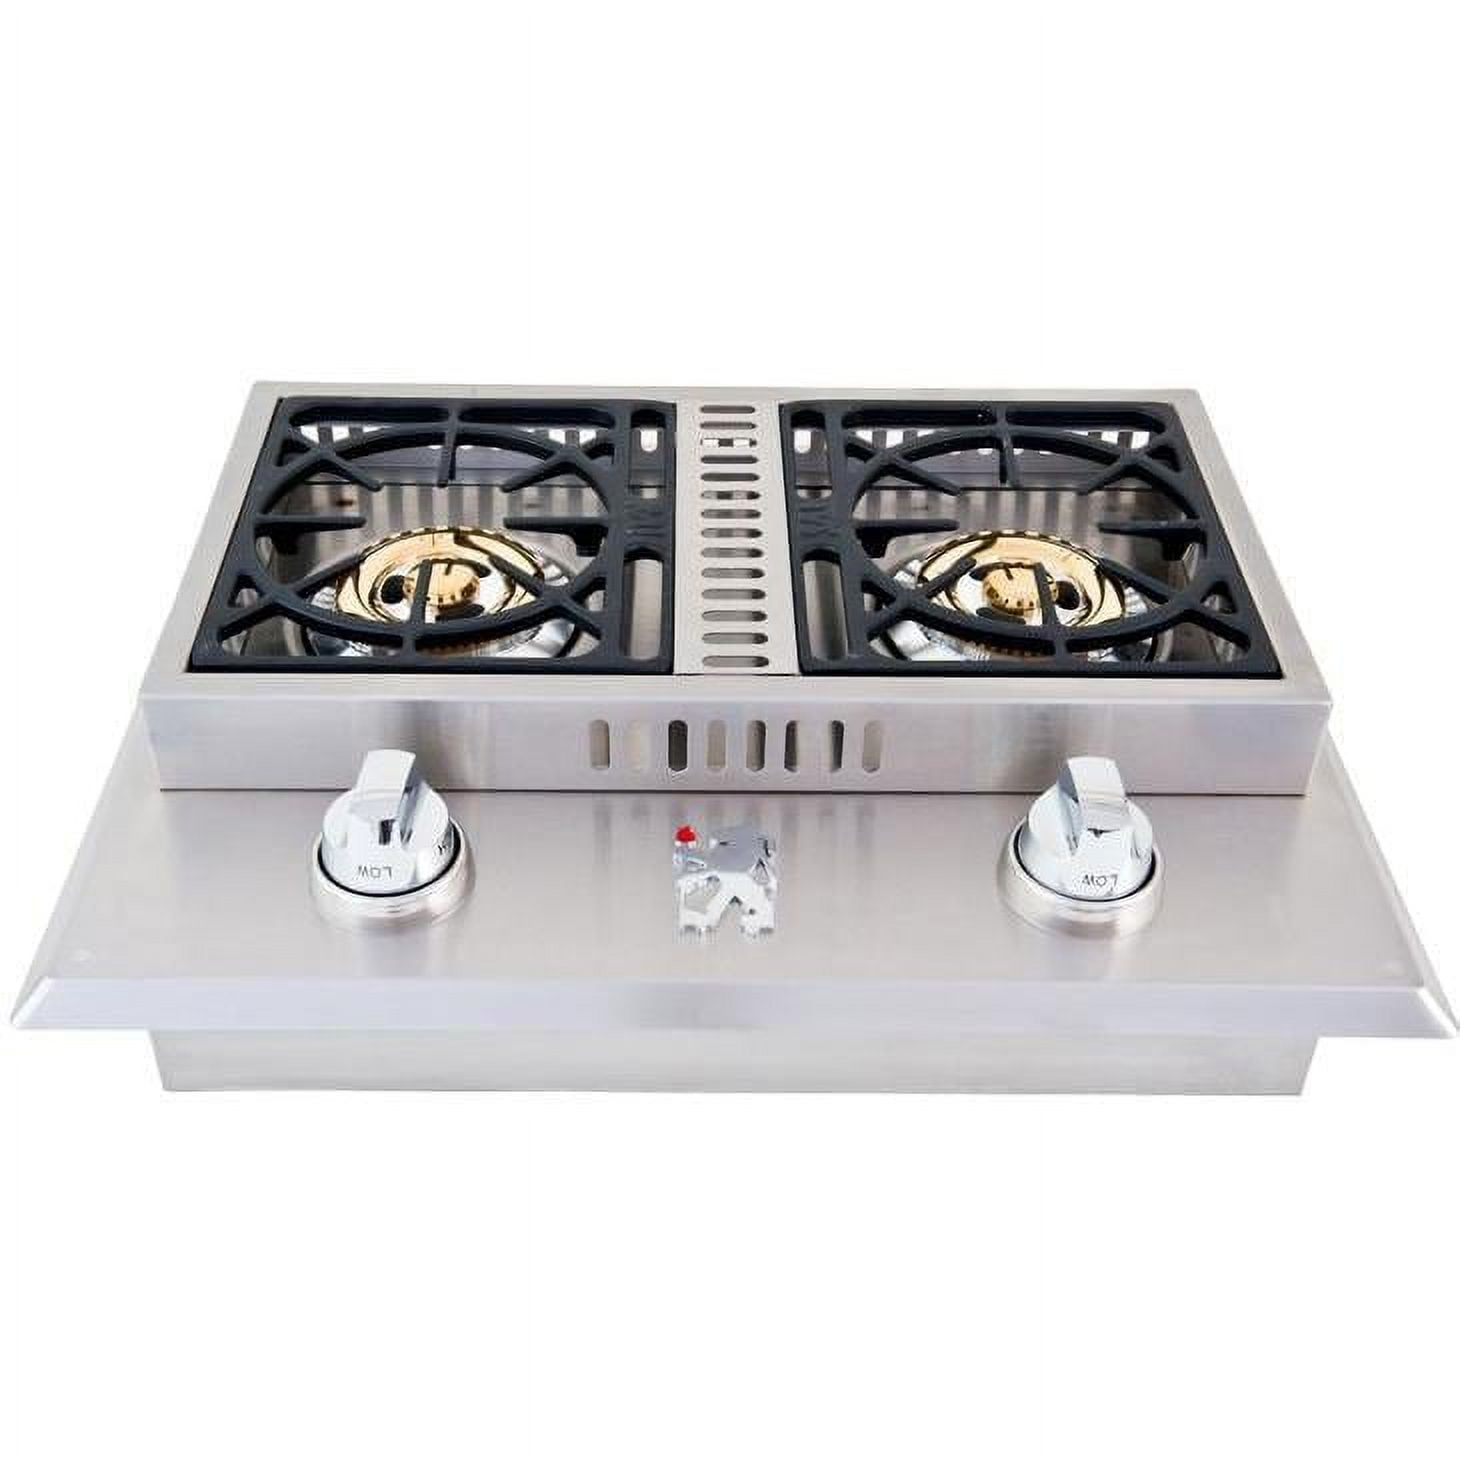 Sonret gas stove portable 2 burner, double gas stove stainless steel  camping stove -propane portable cooktop indian style gas stove For Cooking